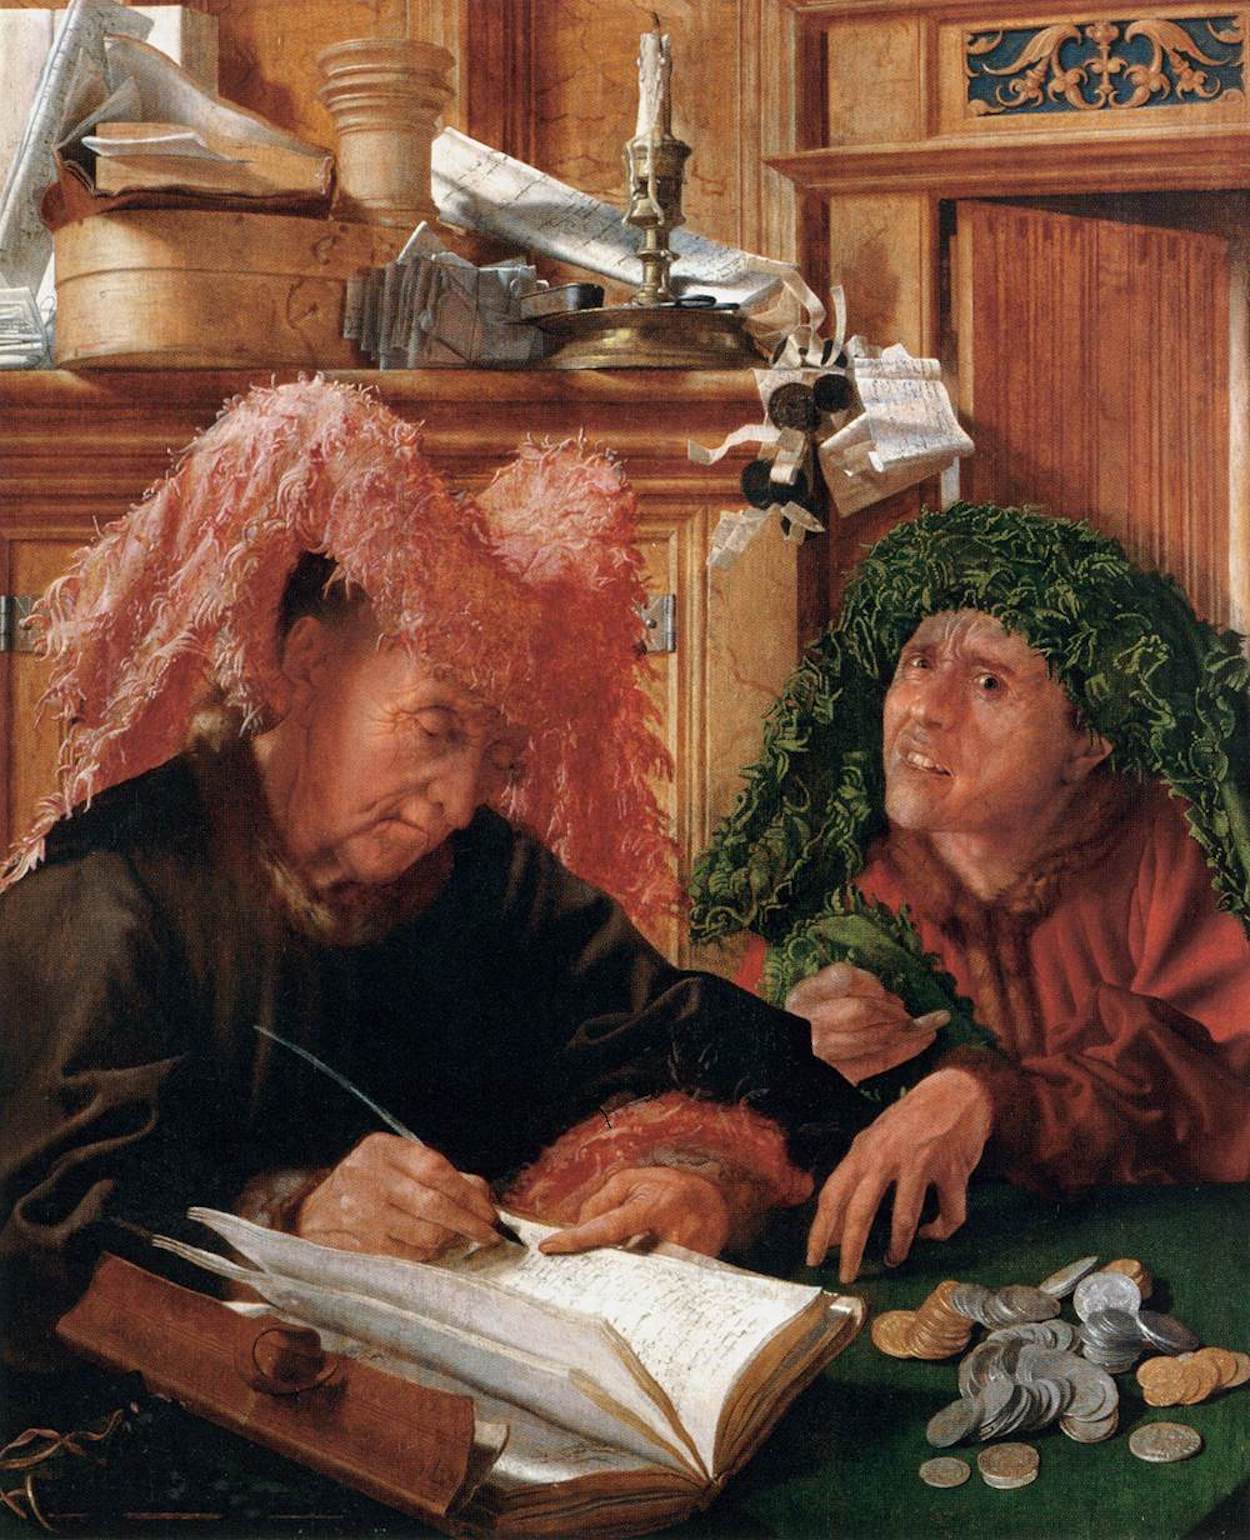 Two Tax Collector by Marinus van Reymerswaele - c. 1540 - 92 x 74.6 cm National Gallery